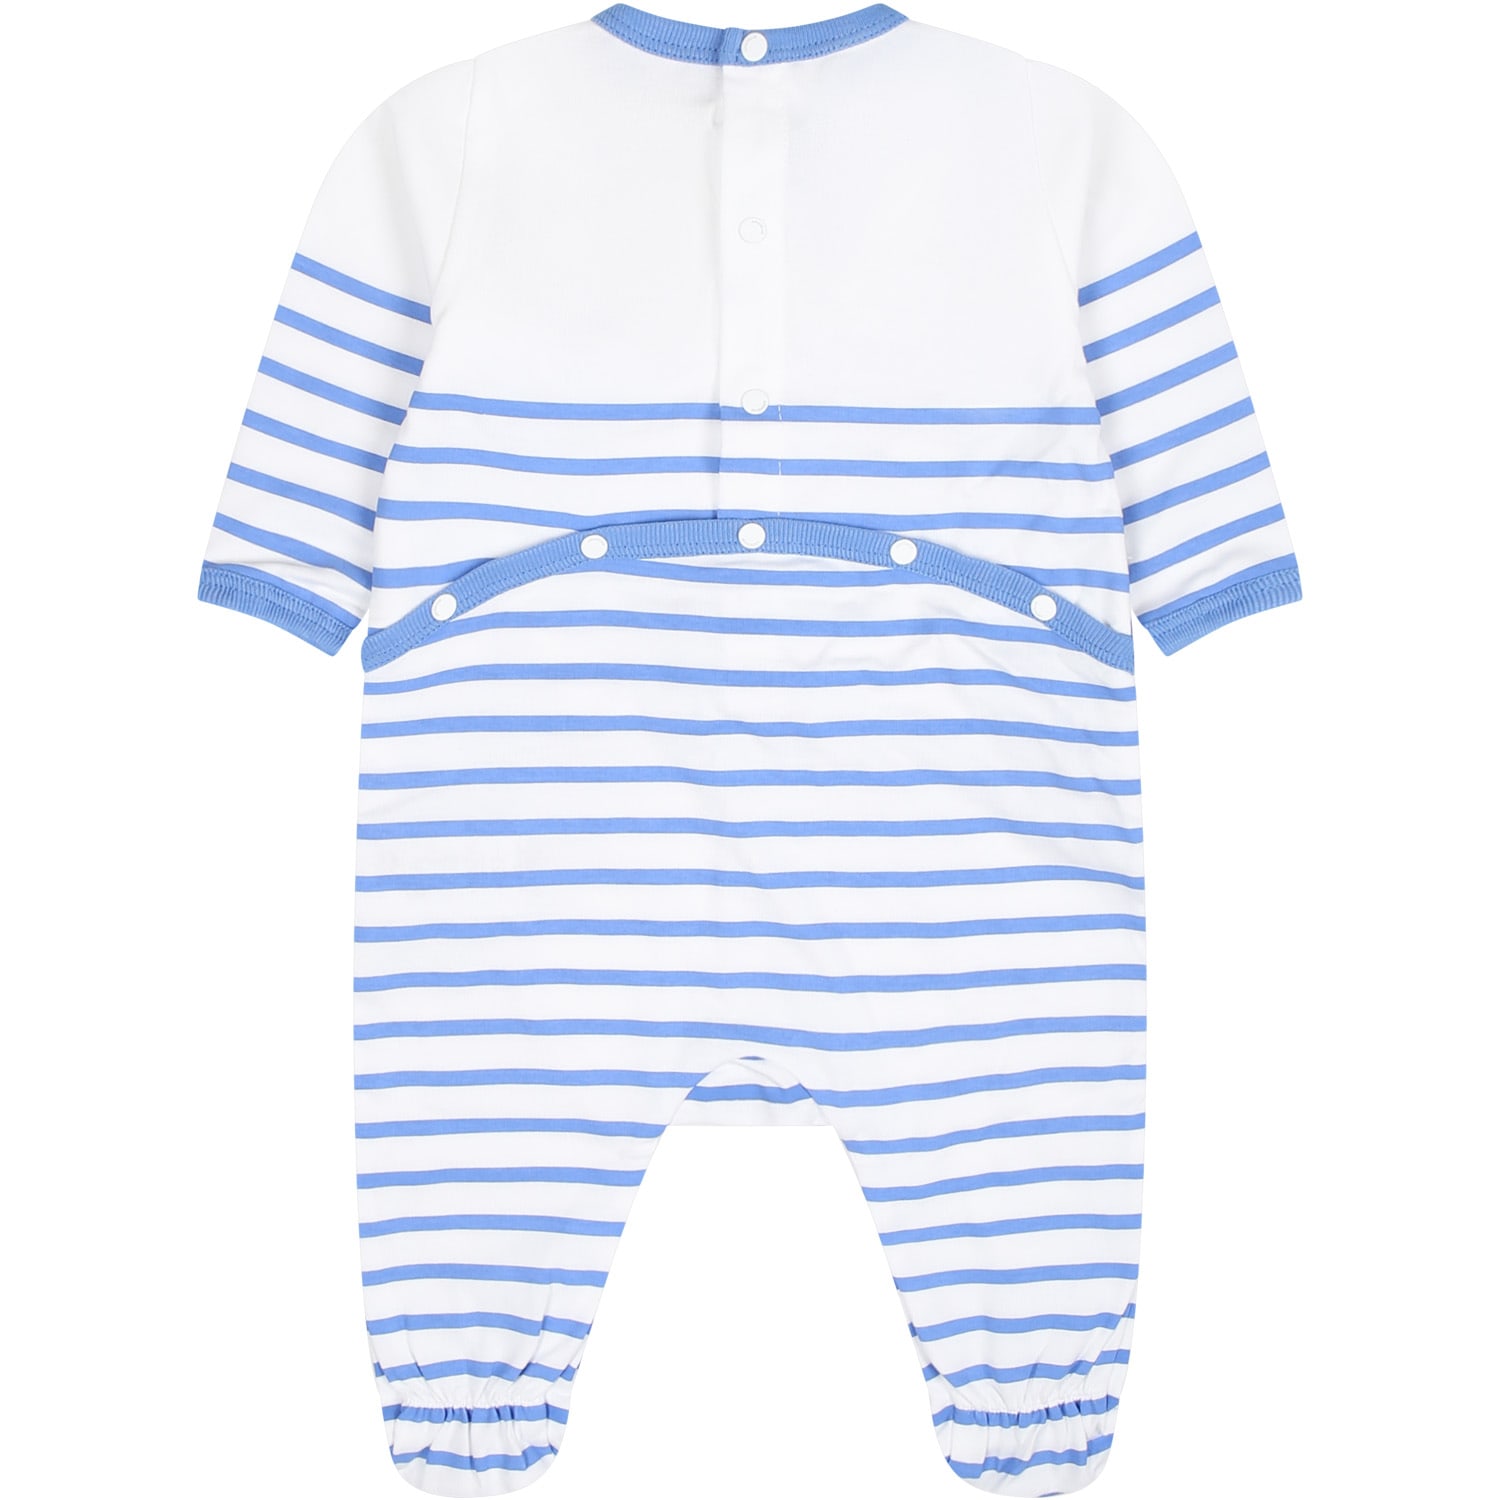 Shop Givenchy Light Blue Set For Baby Boy With Logo Stripes In Azzurro